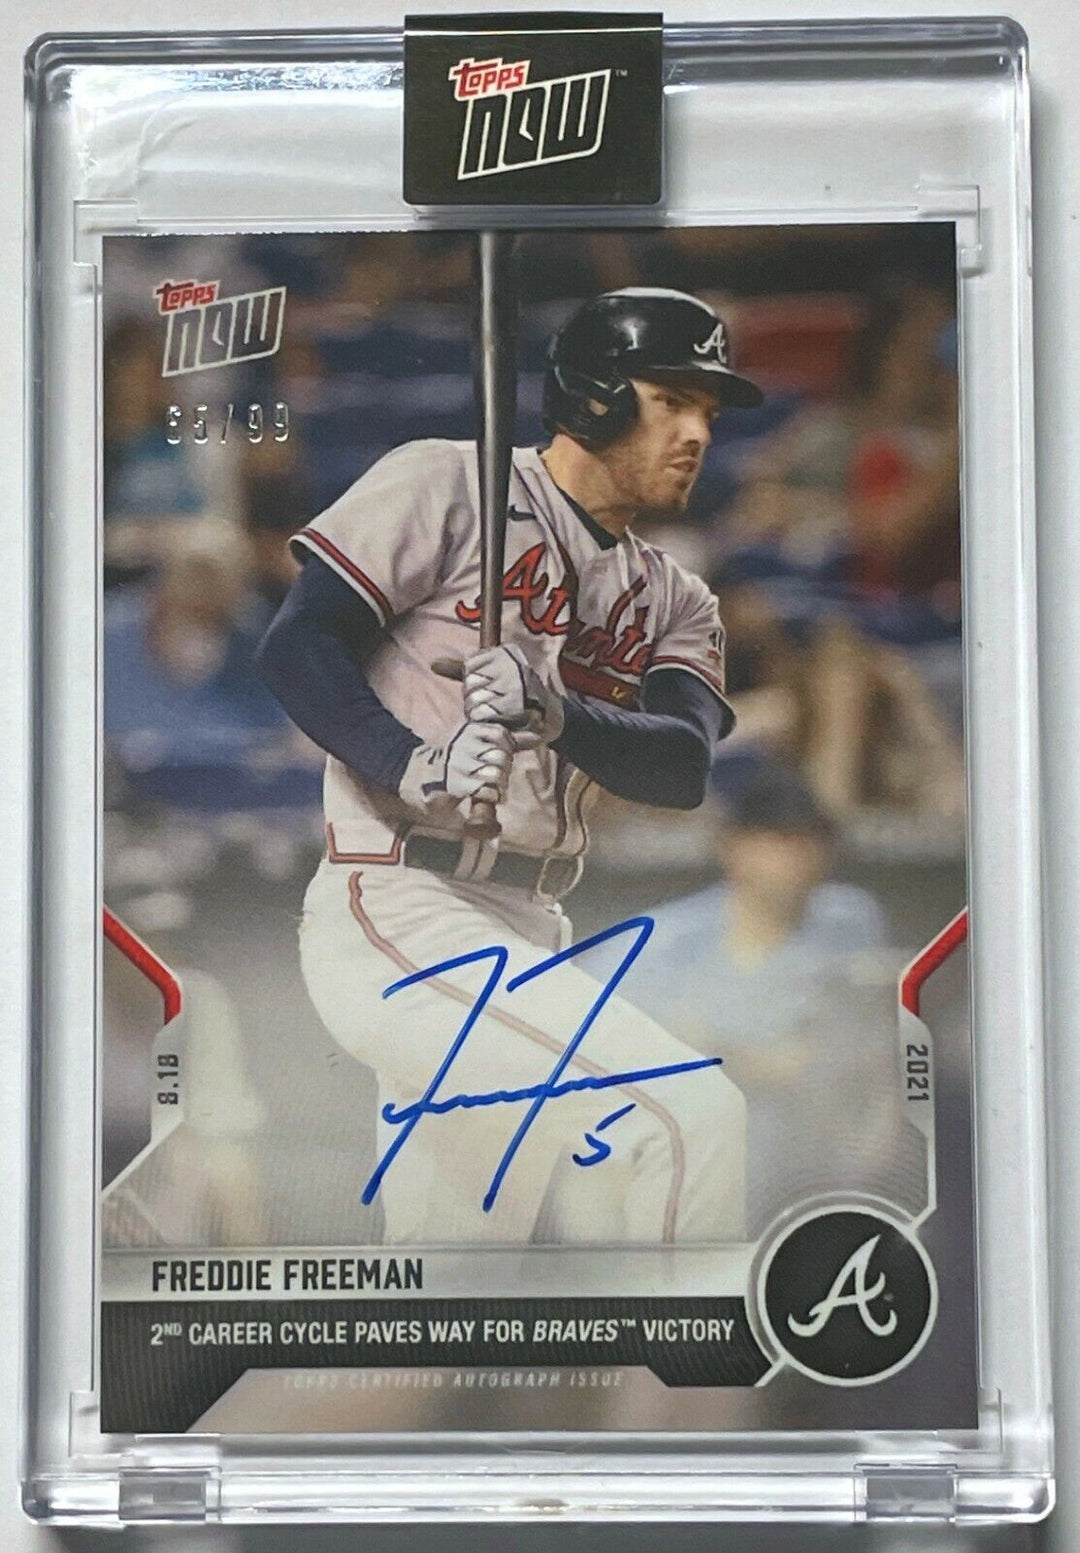 FREDDIE FREEMAN SIGNED 2nd CAREER HIT FOR CYCLE TOPPS NOW BRAVES AUTO CARD #678A Image 3